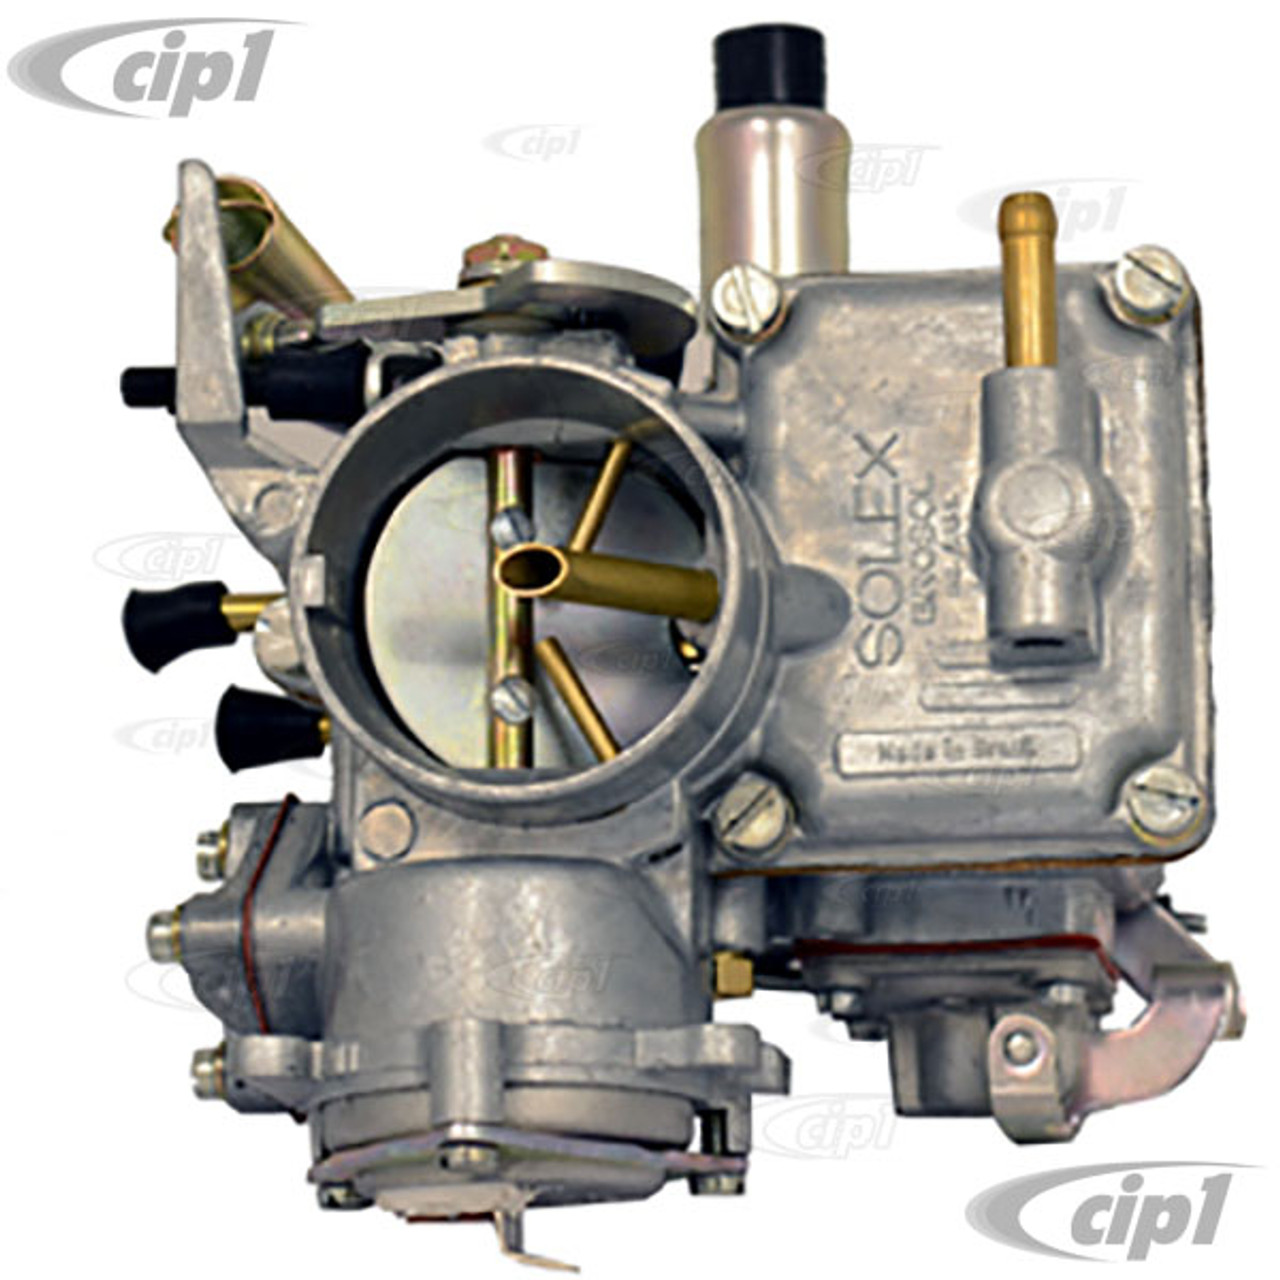 VWC-113-129-029-ADP - 113129029 - BROSOL/SOLEX - 30/31 PICT CARBURETOR WITH  IDLE CUT OFF VALVE & VOLUME CONTROL SCREW (WITH ADAPTER) - 12-VOLT - FITS  BEETLE/GHIA 67-70 (WITH ADAPTER TO FIT BEETLE/GHIA 71-74 - BUS 1971) - SOLD  EACH